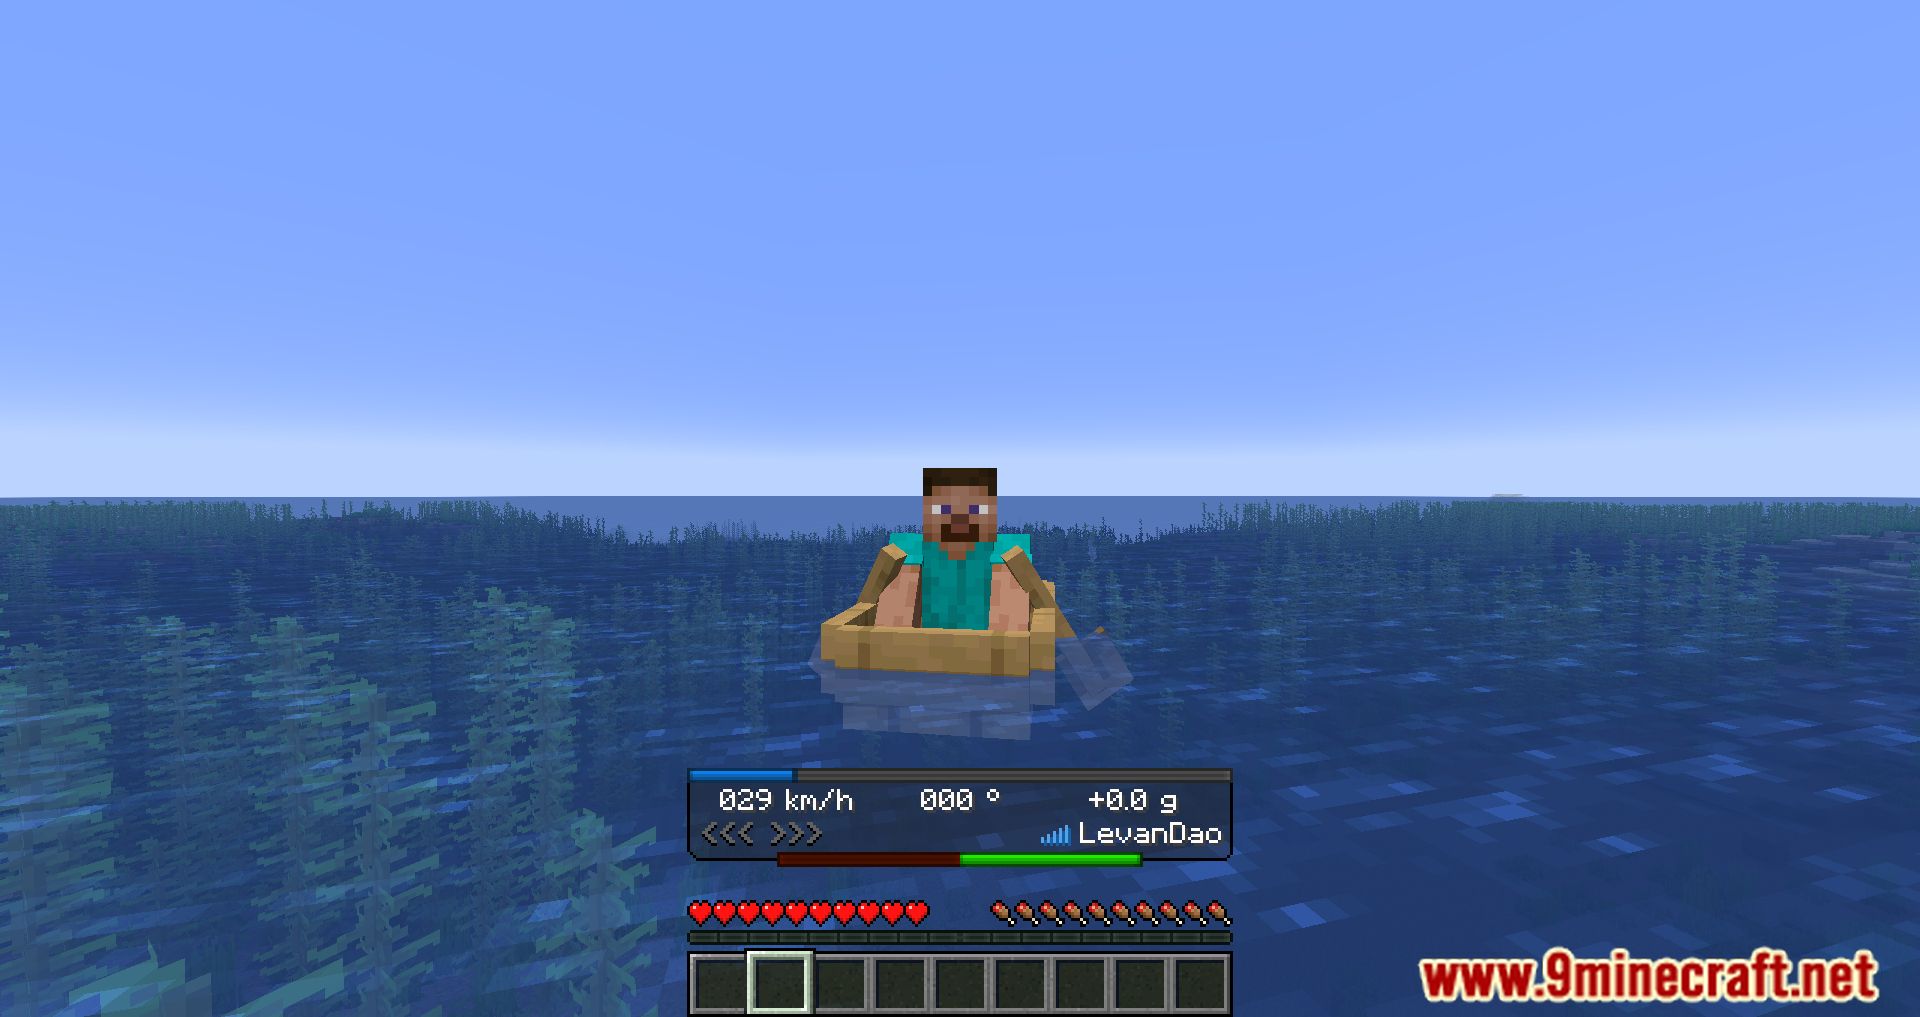 Boat Hud Mod (1.20.4, 1.19.4) - Display The Information Of The Boat 9